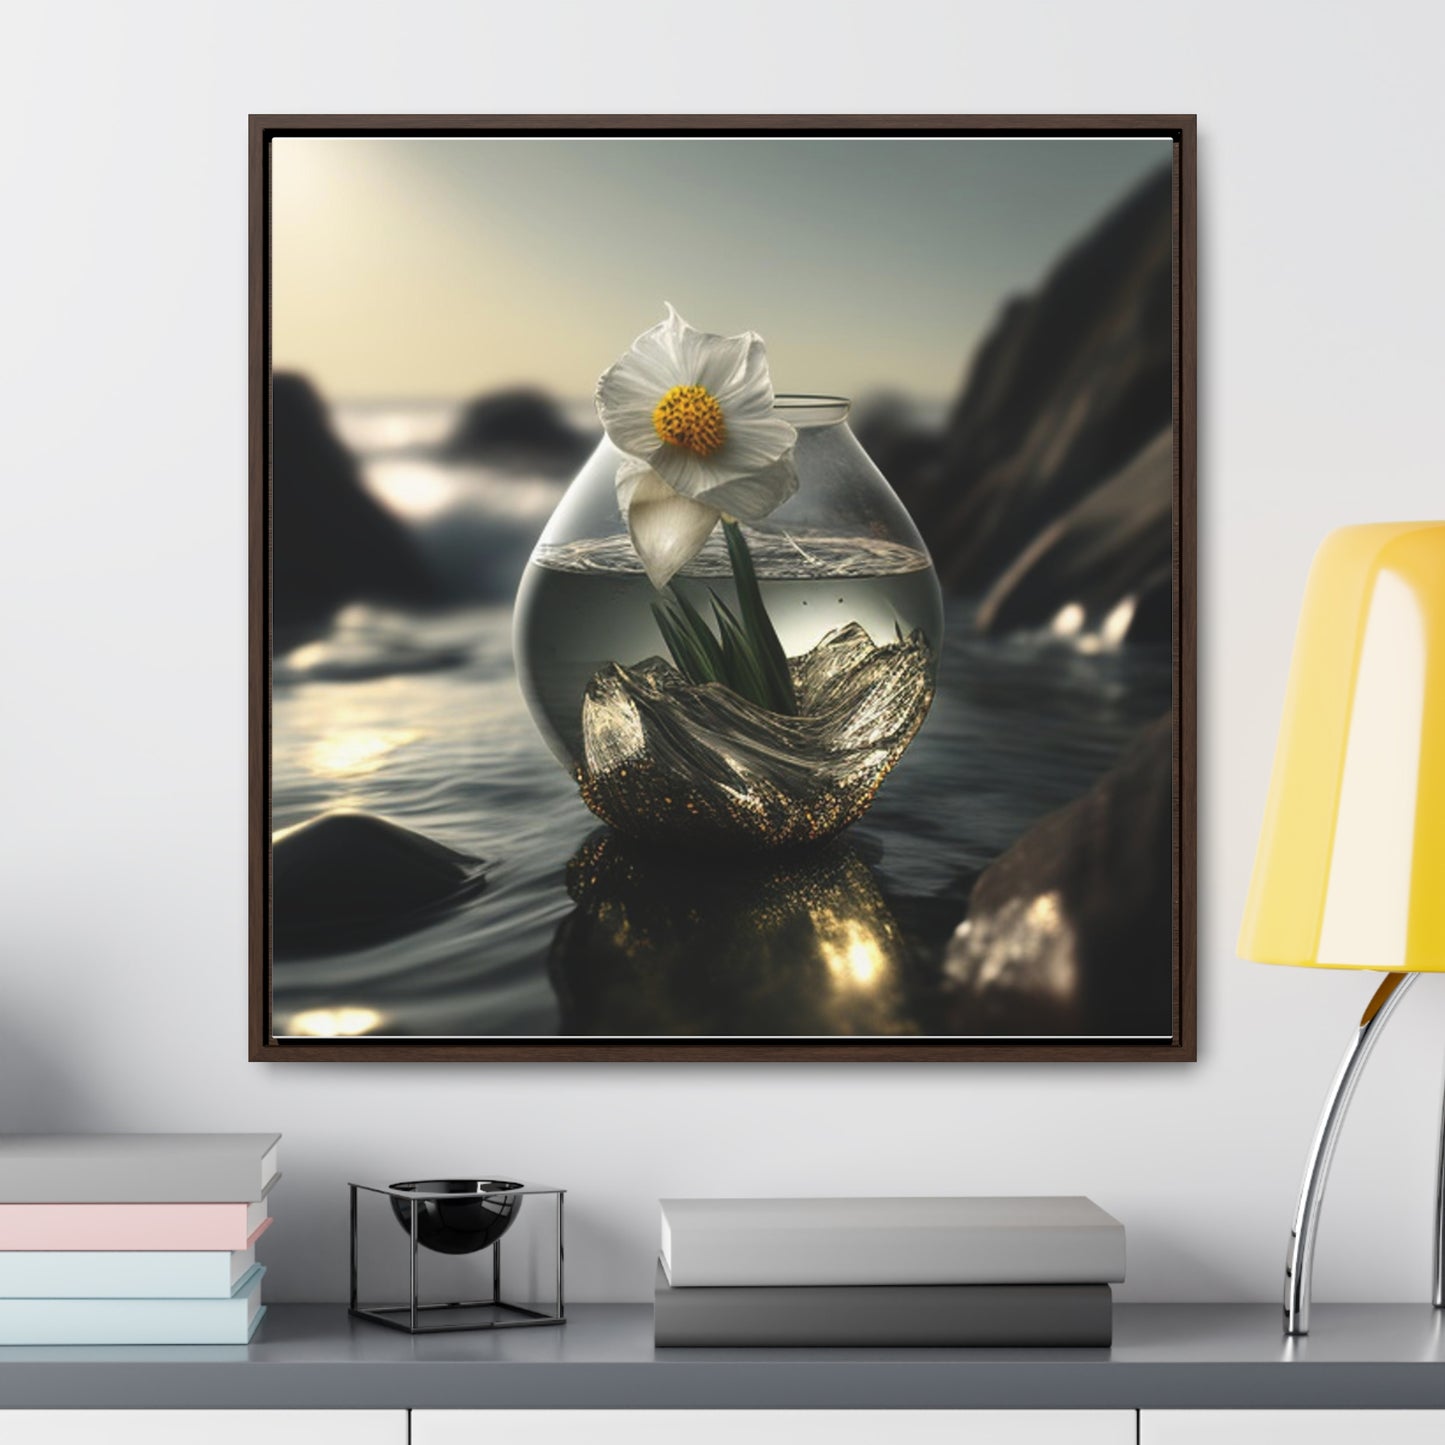 Gallery Canvas Wraps, Square Frame Daffodil 1